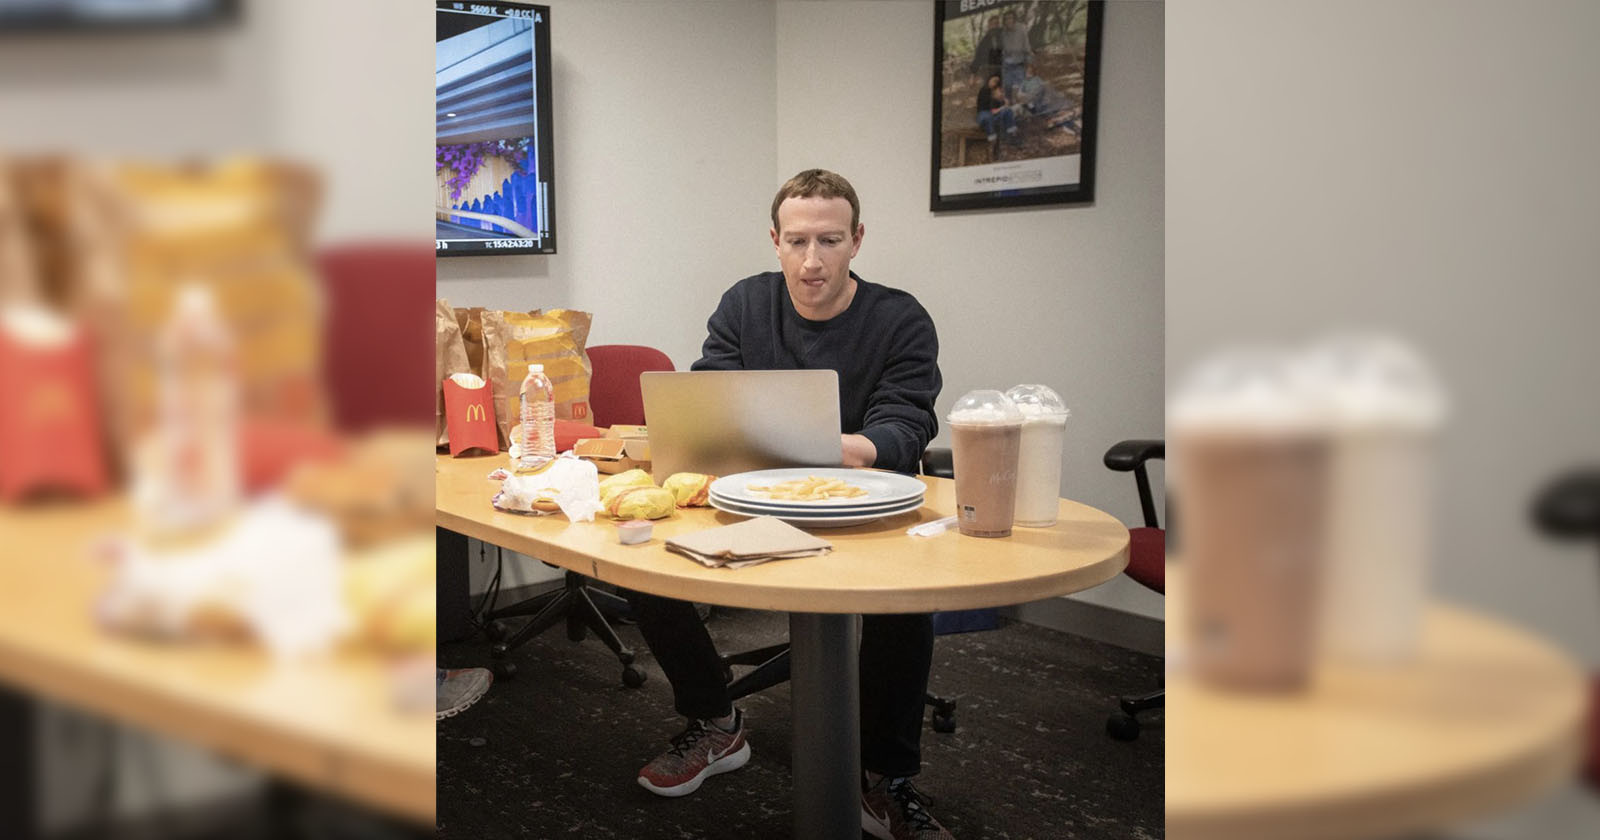 Mark Zuckerbergs Photoshopped Picture Highlights His Dislike of Apple